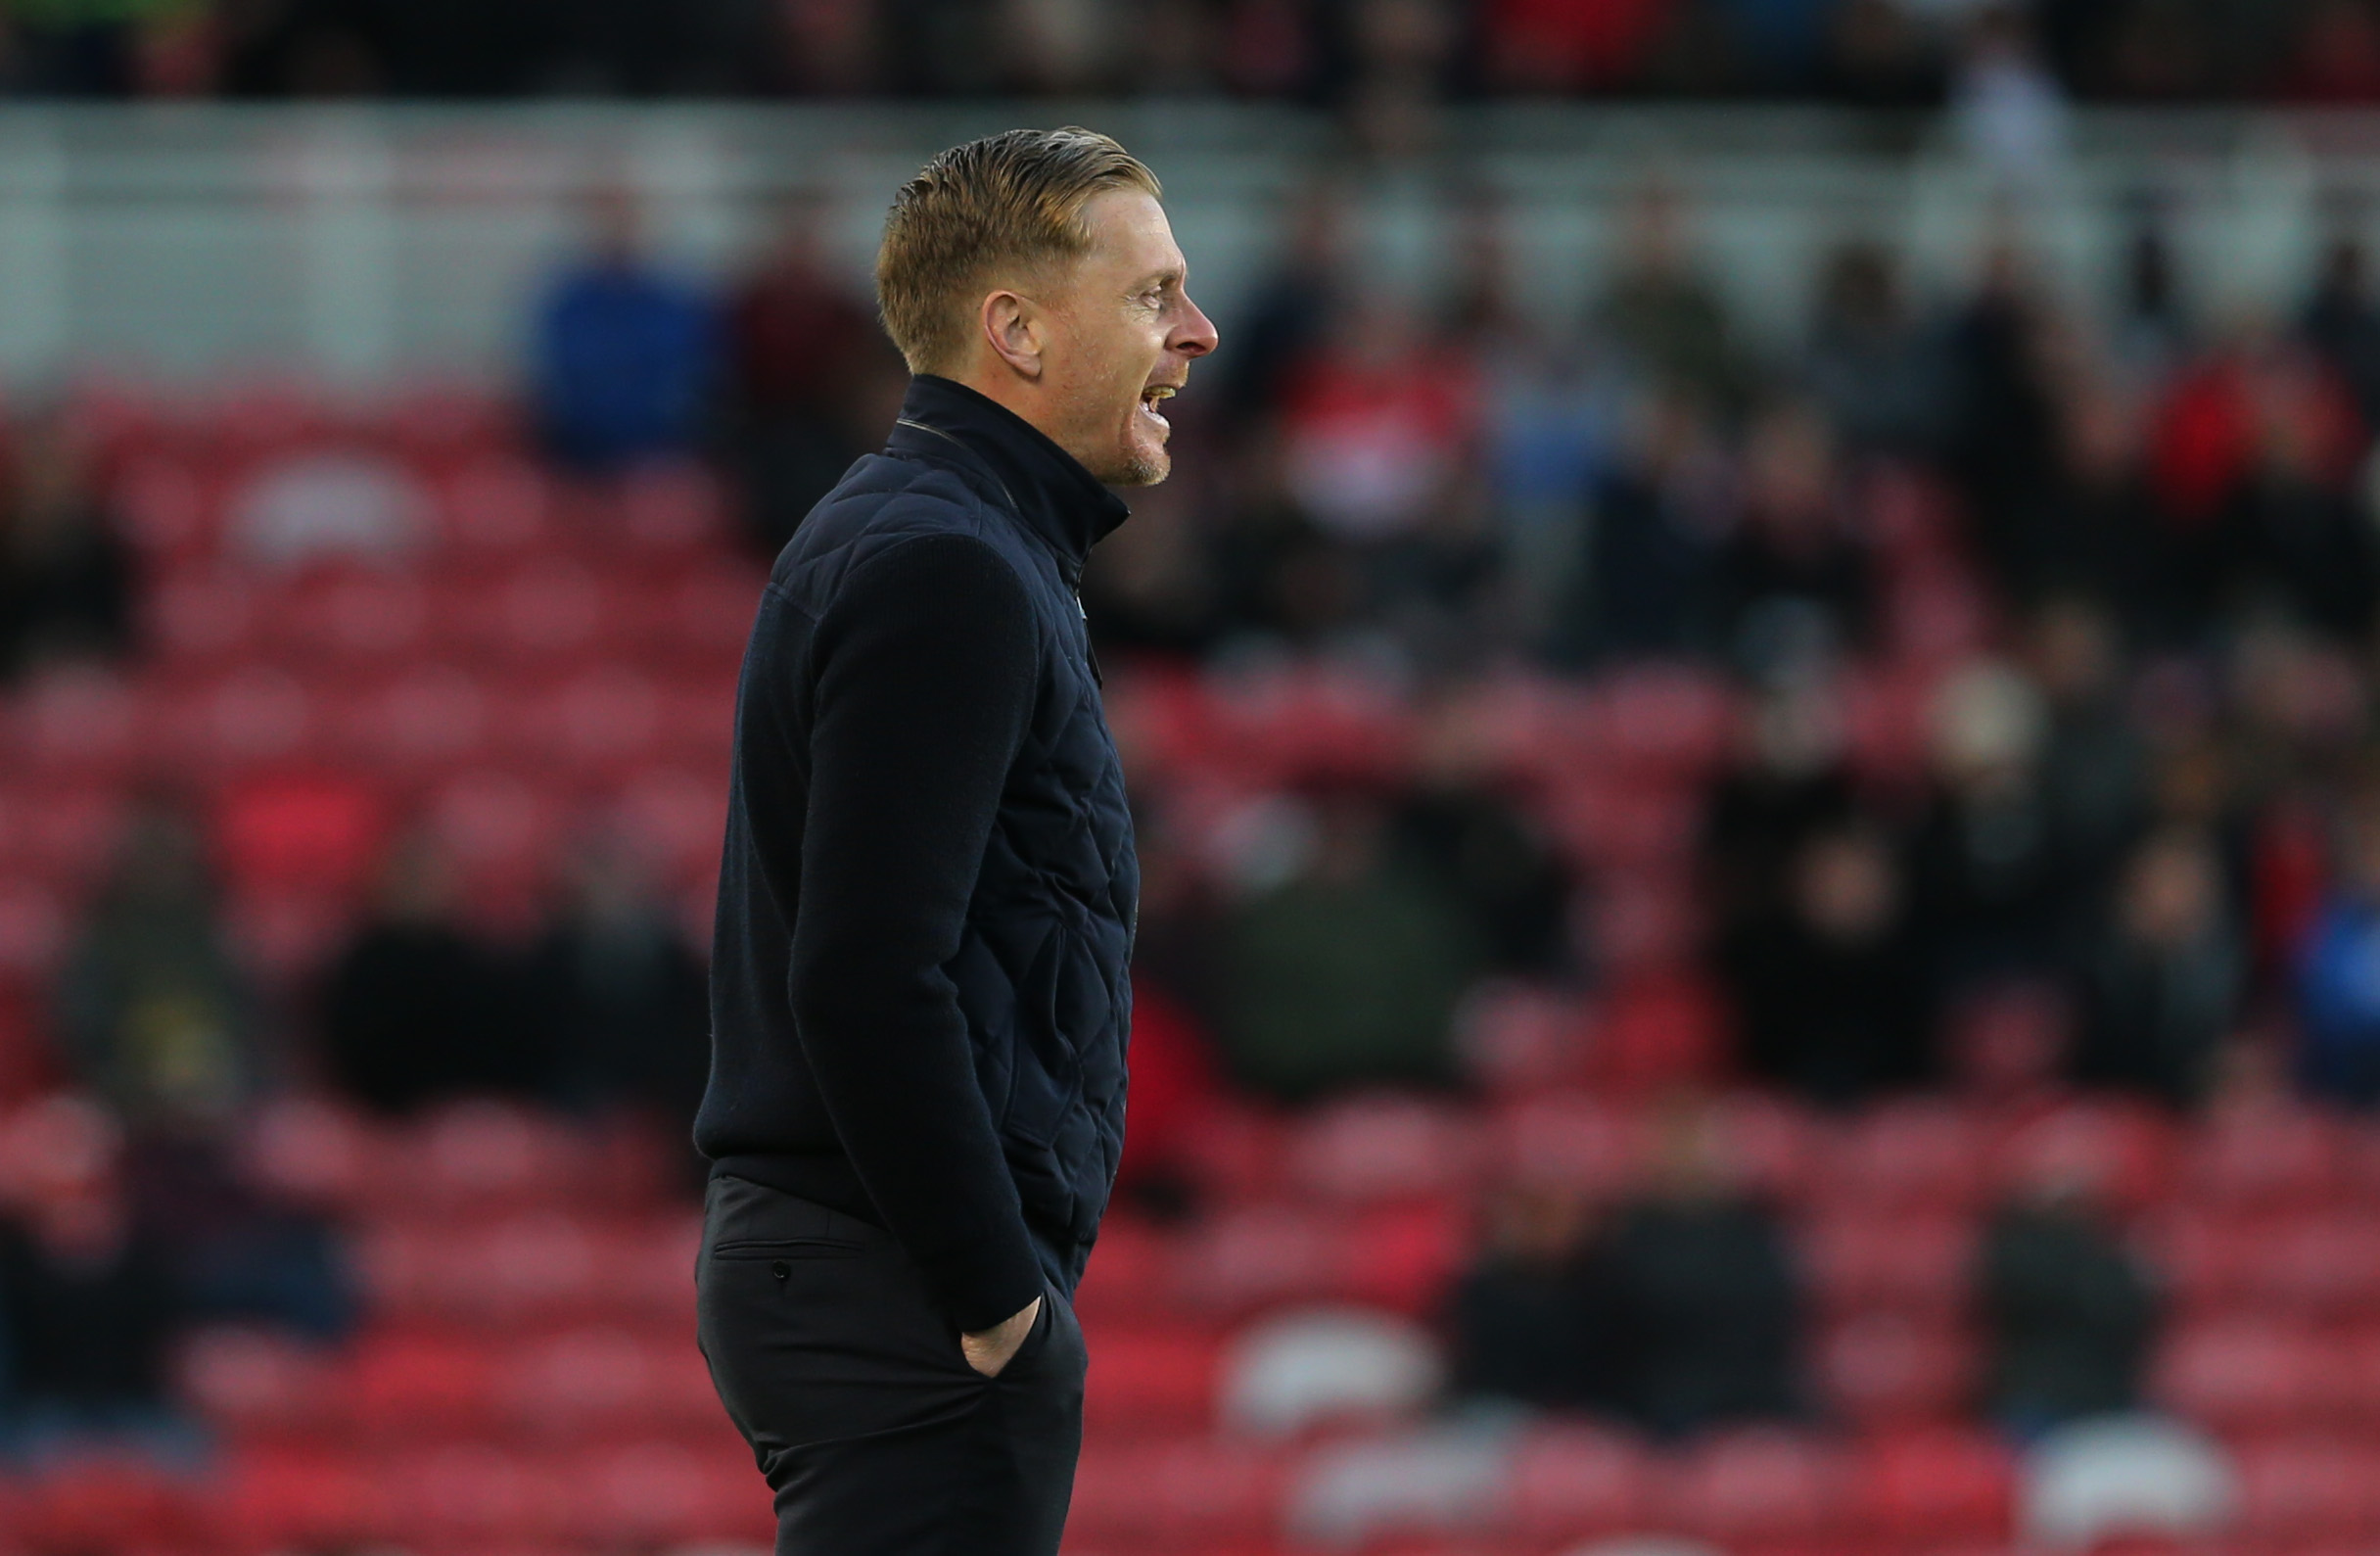 ‘A comfortable success’ as Garry Monk’s Middlesbrough ease past Ipswich